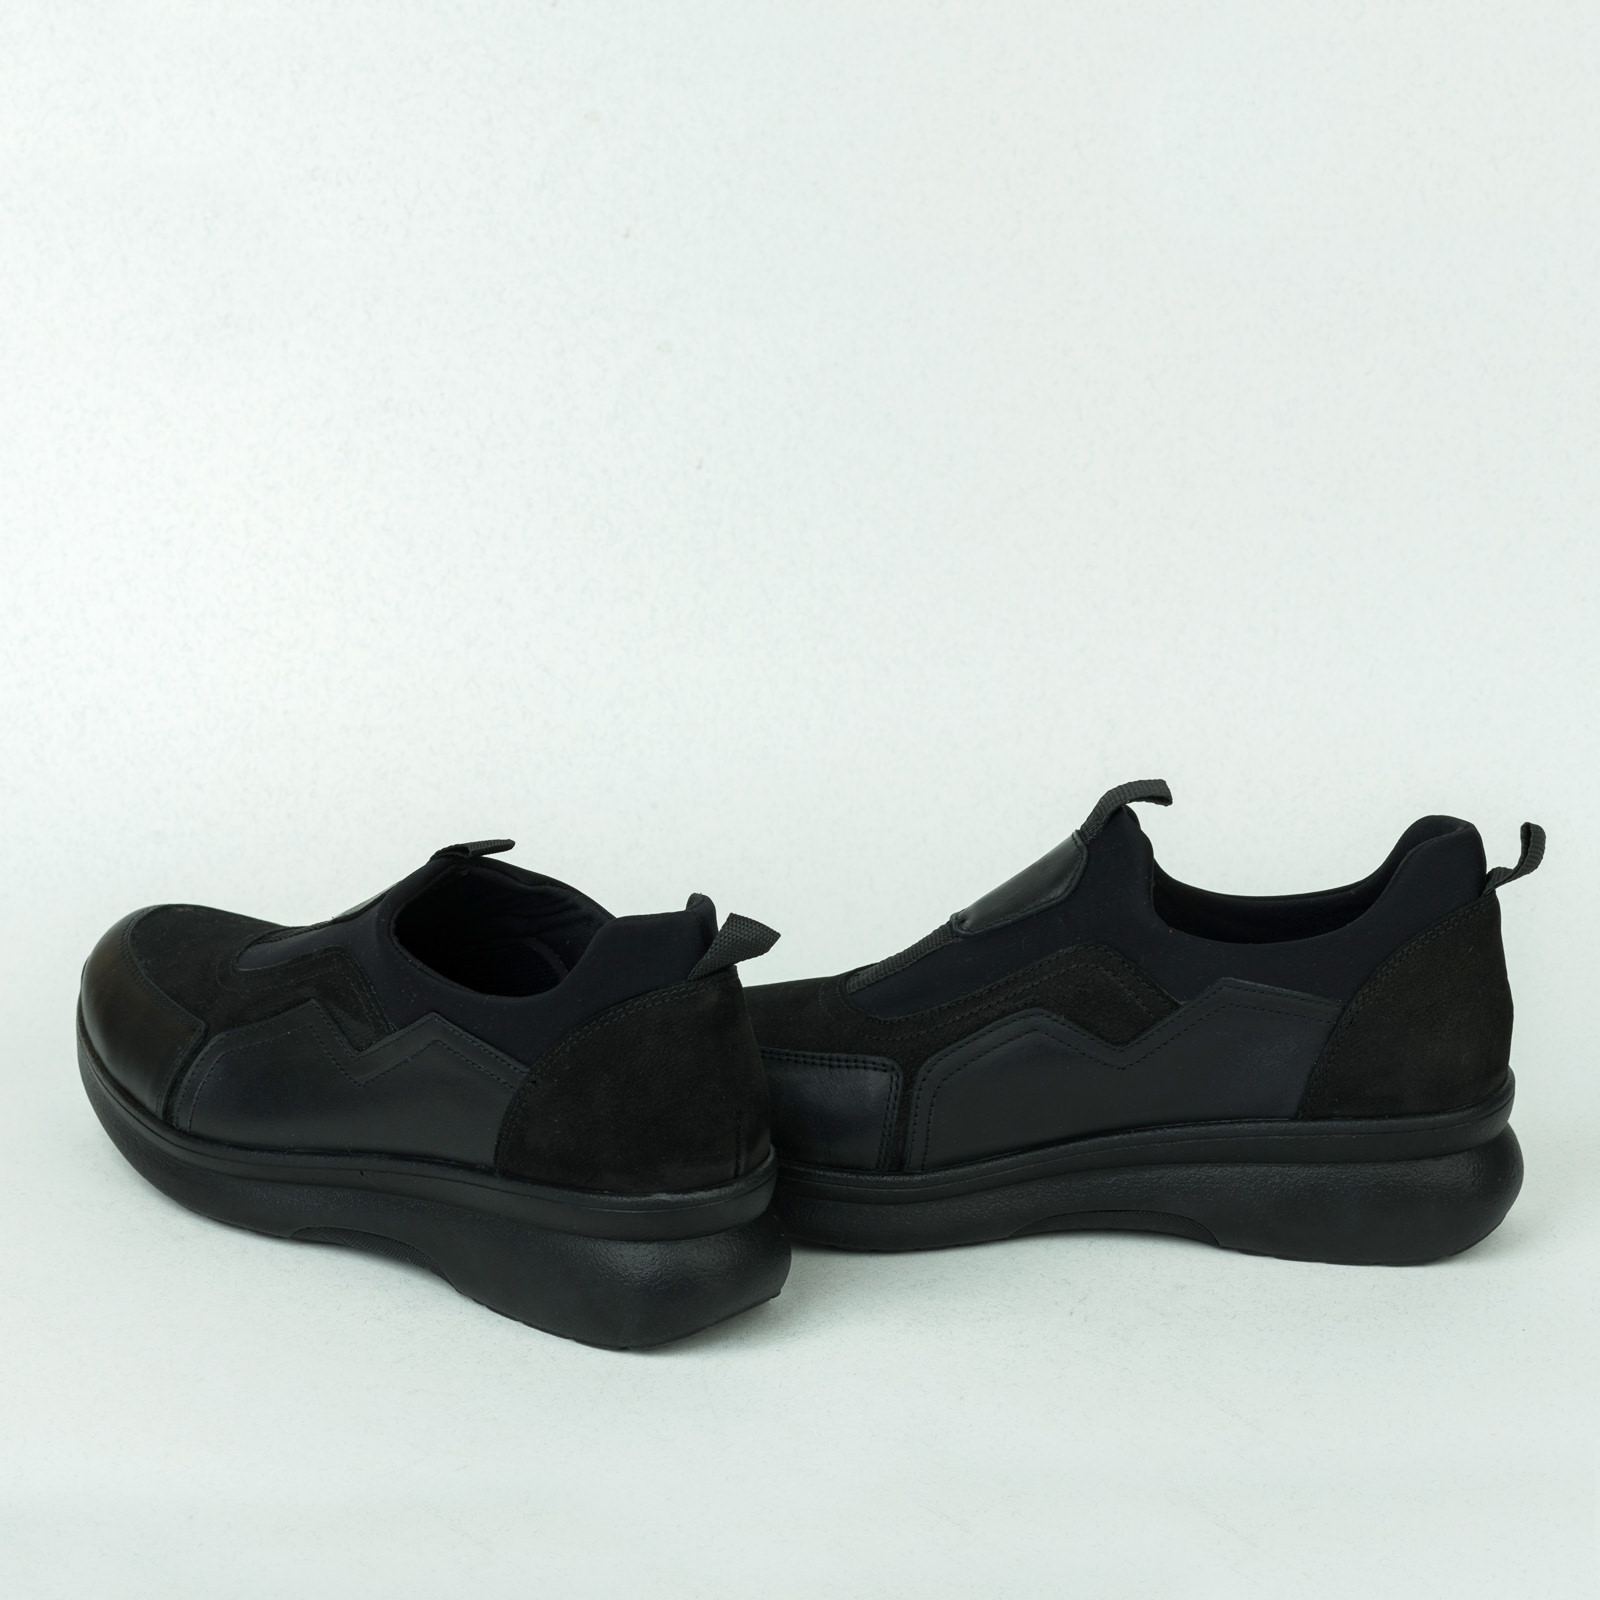 Leather sneakers B273 - BLACK